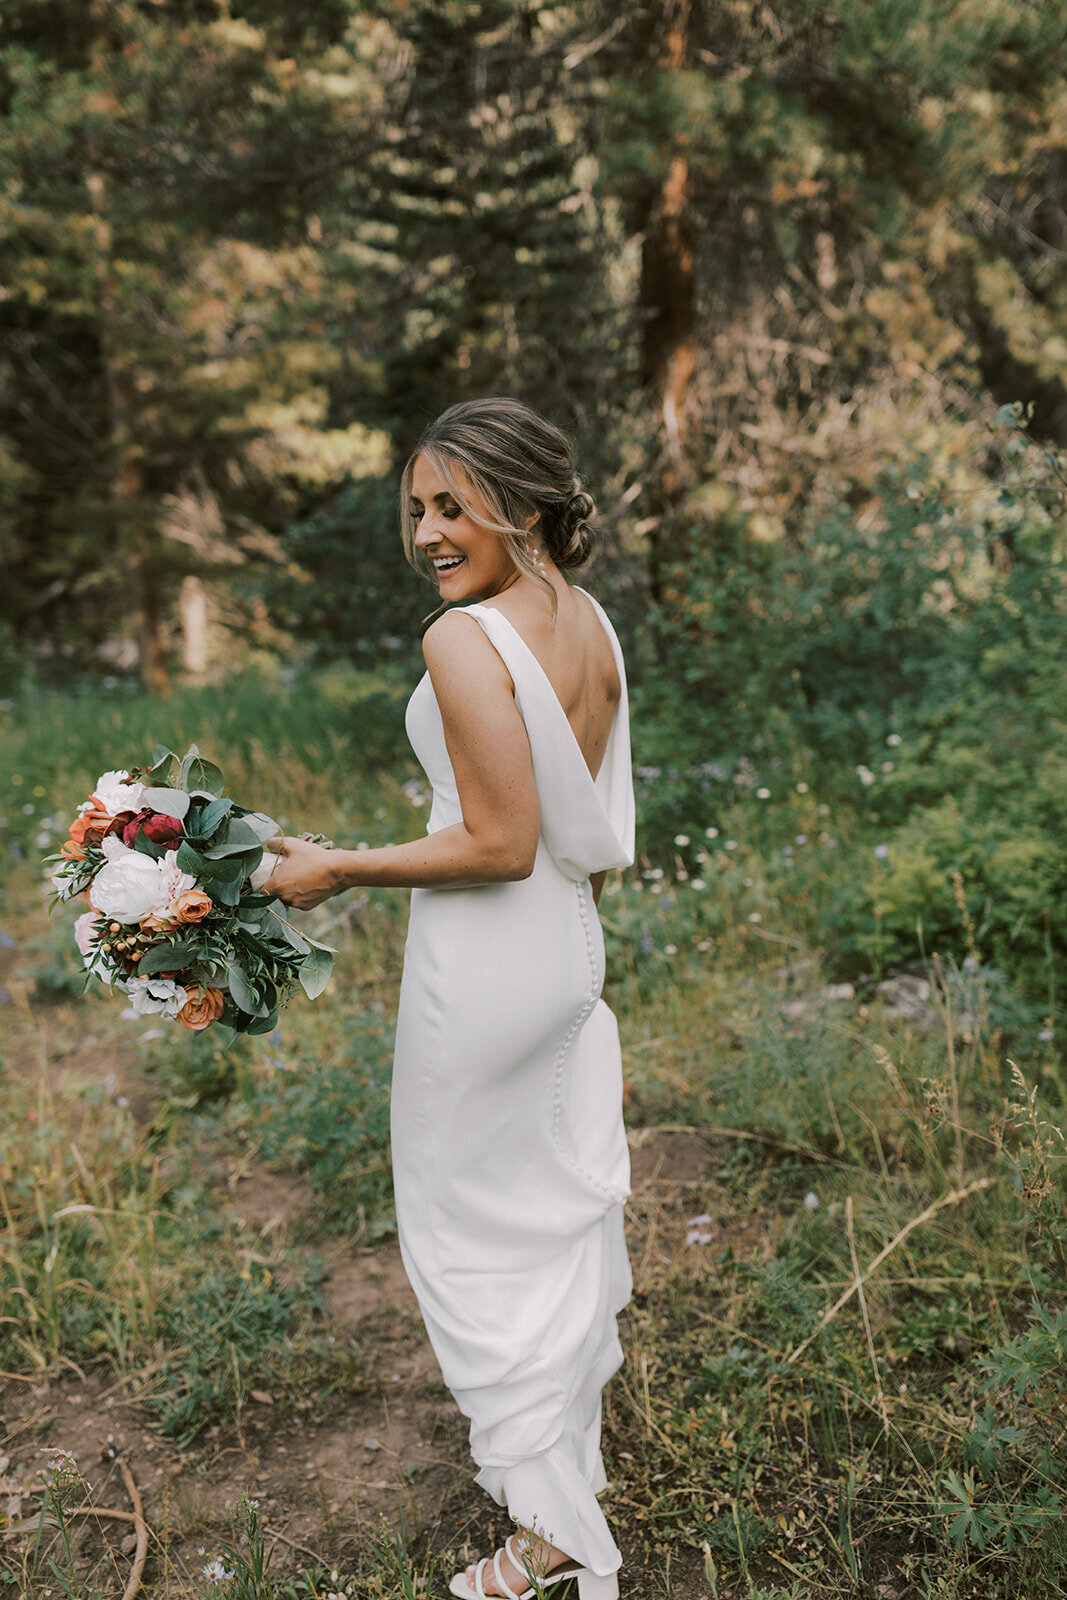 Bride in her wedding gown happily walking  through filed of grass while holding her wedding bouquet